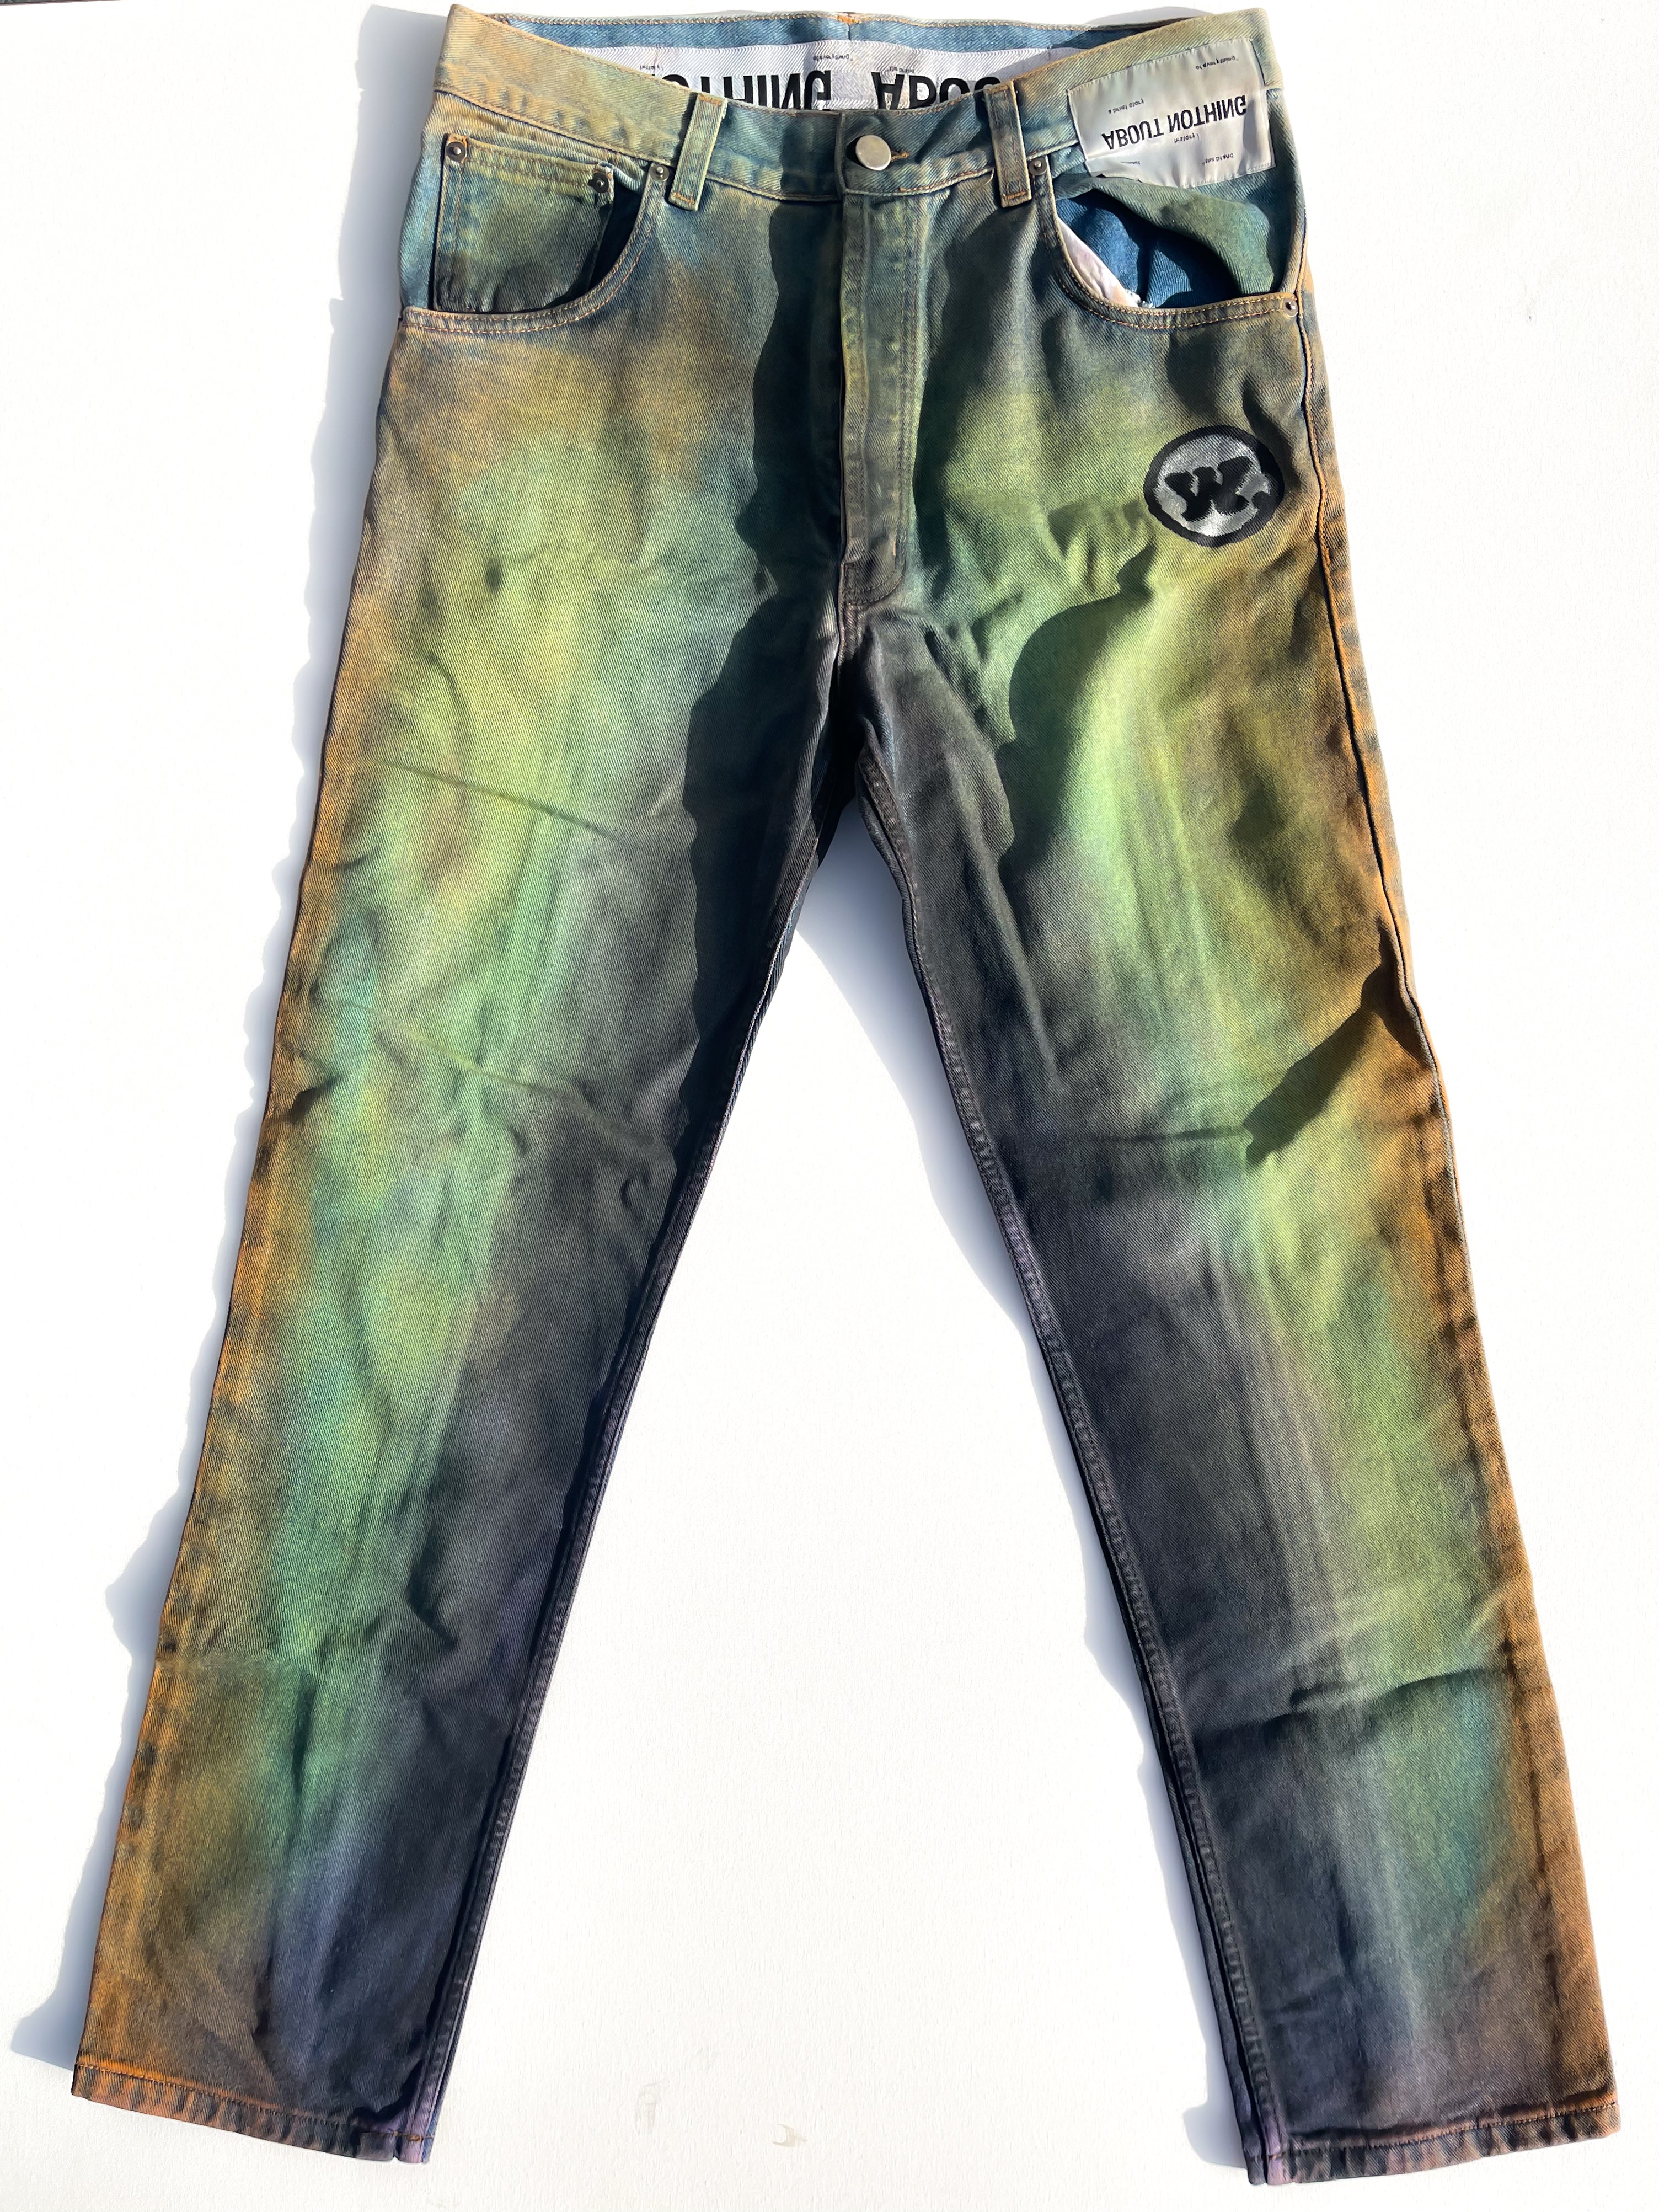 WORLDXIT x ABOUT NOTHING // 1 OF 1 ROCKSPORT JEANS D.06 [MEDIUM]